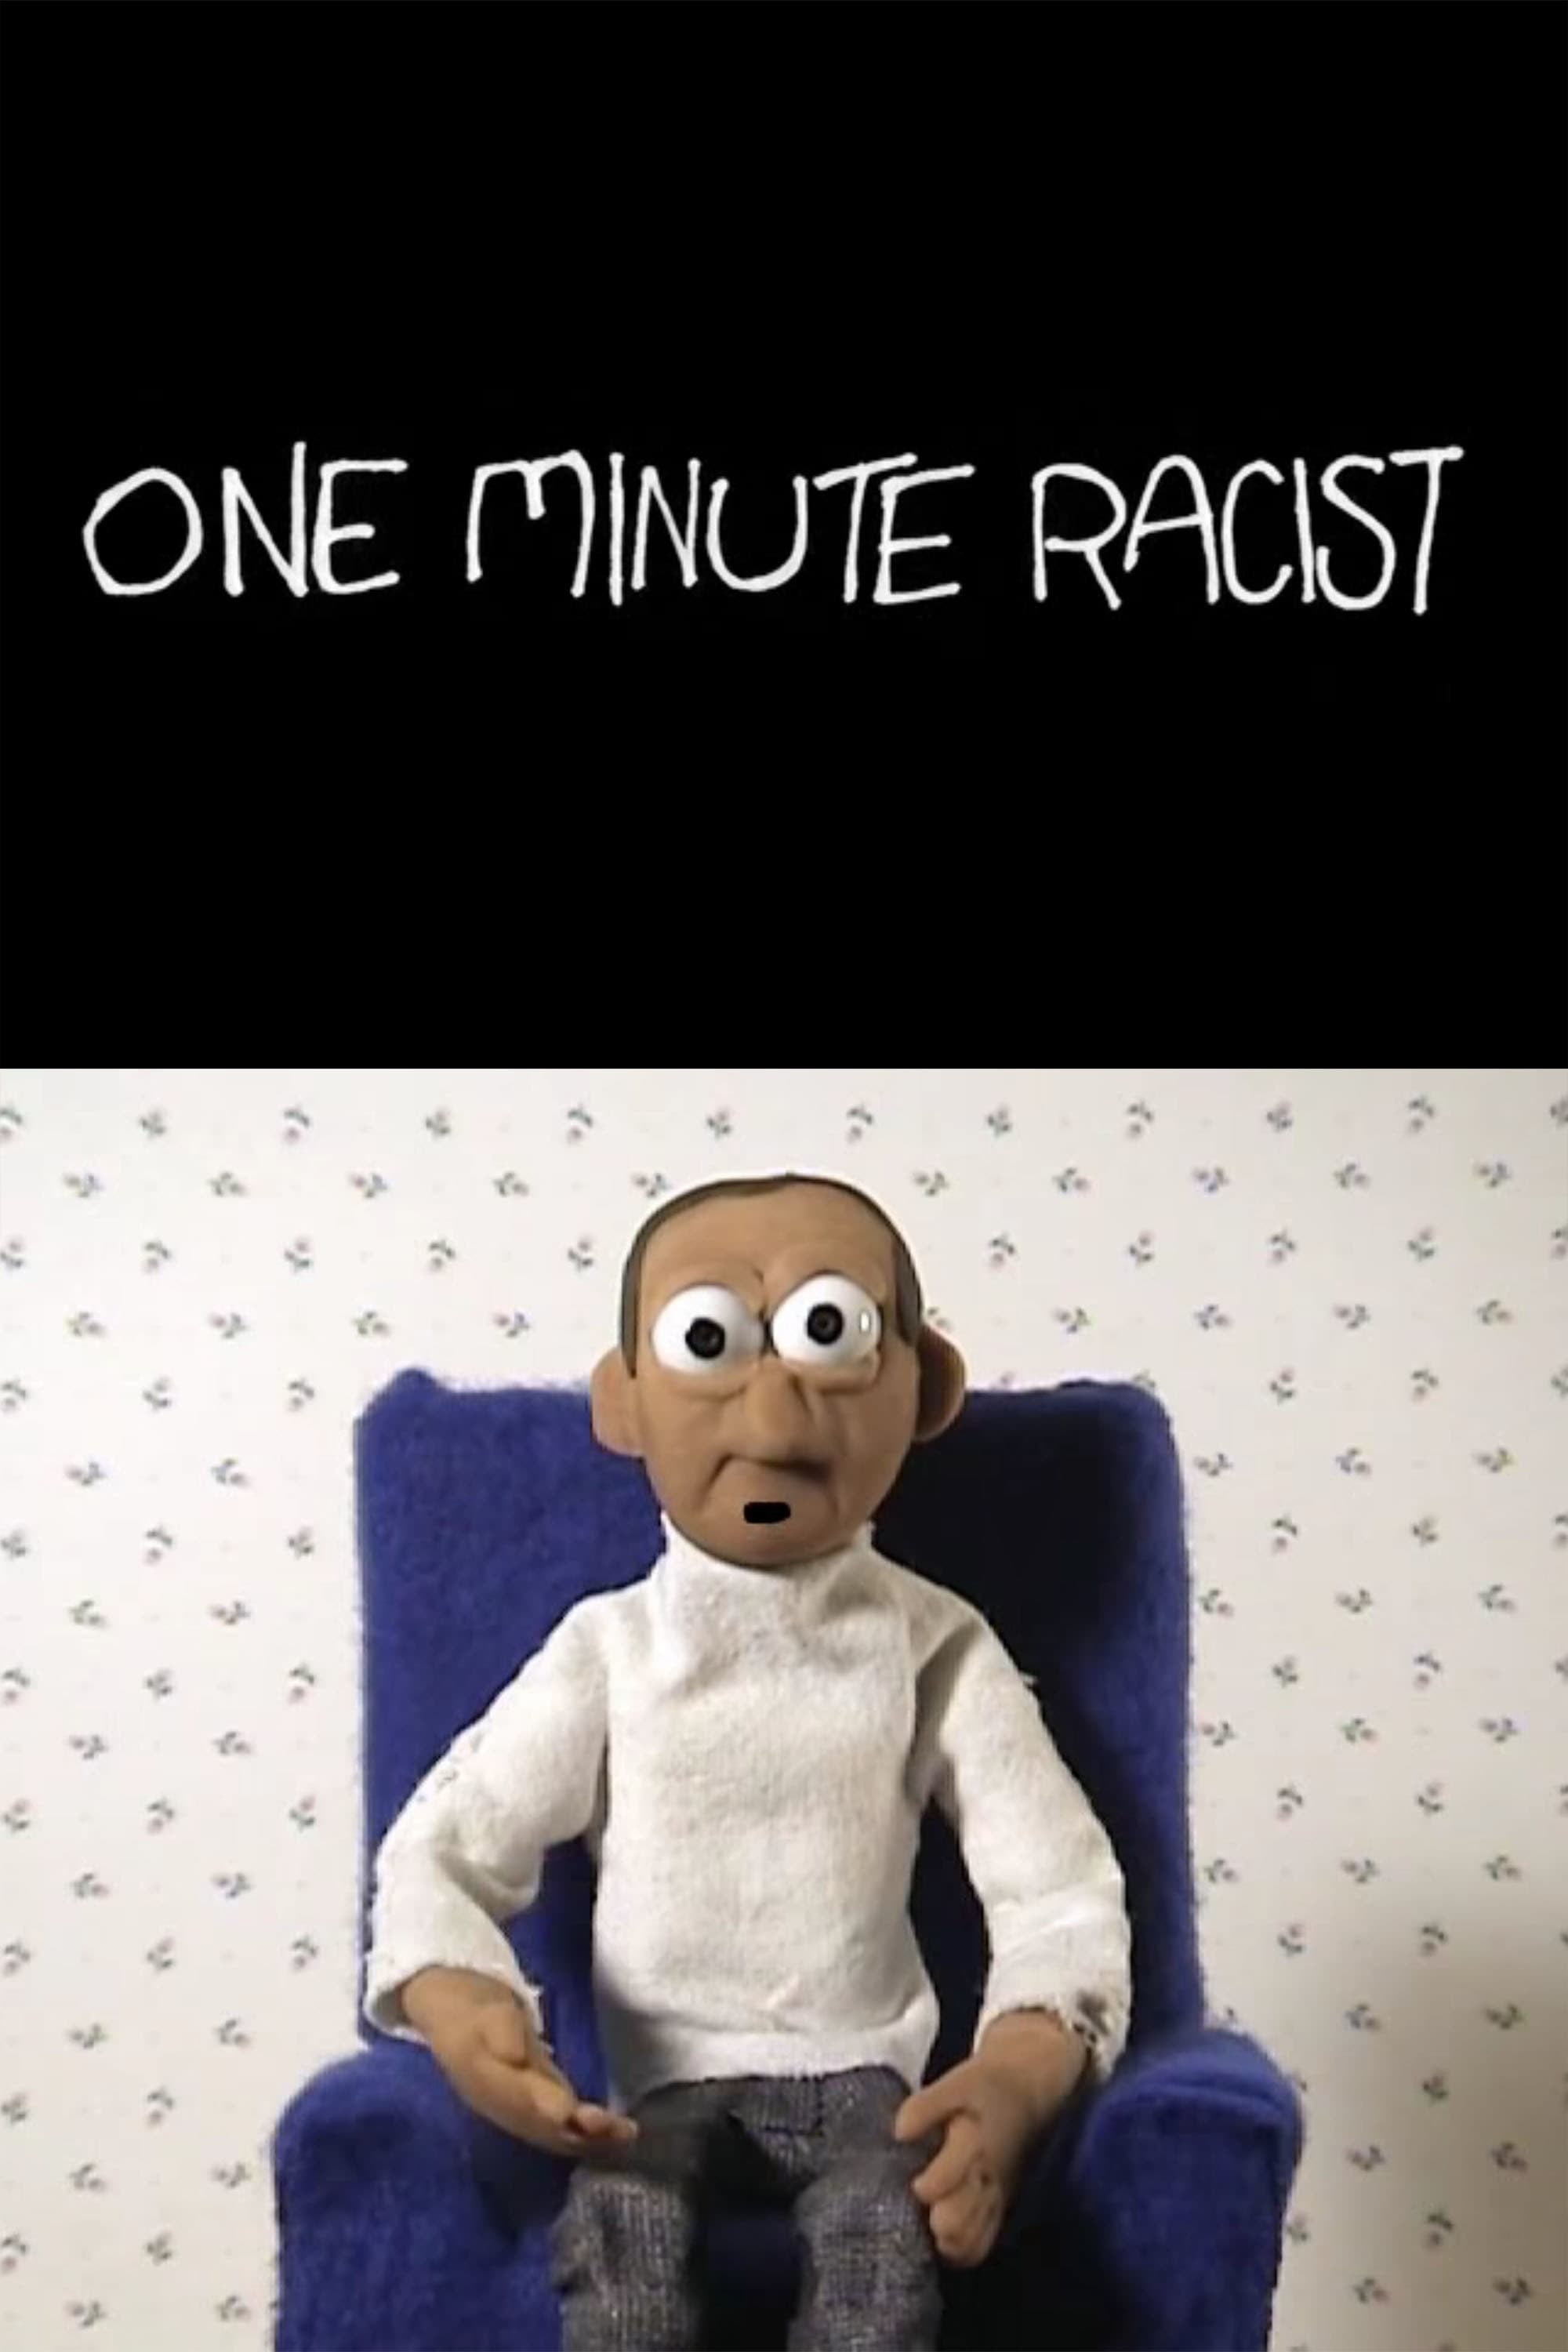 One Minute Racist